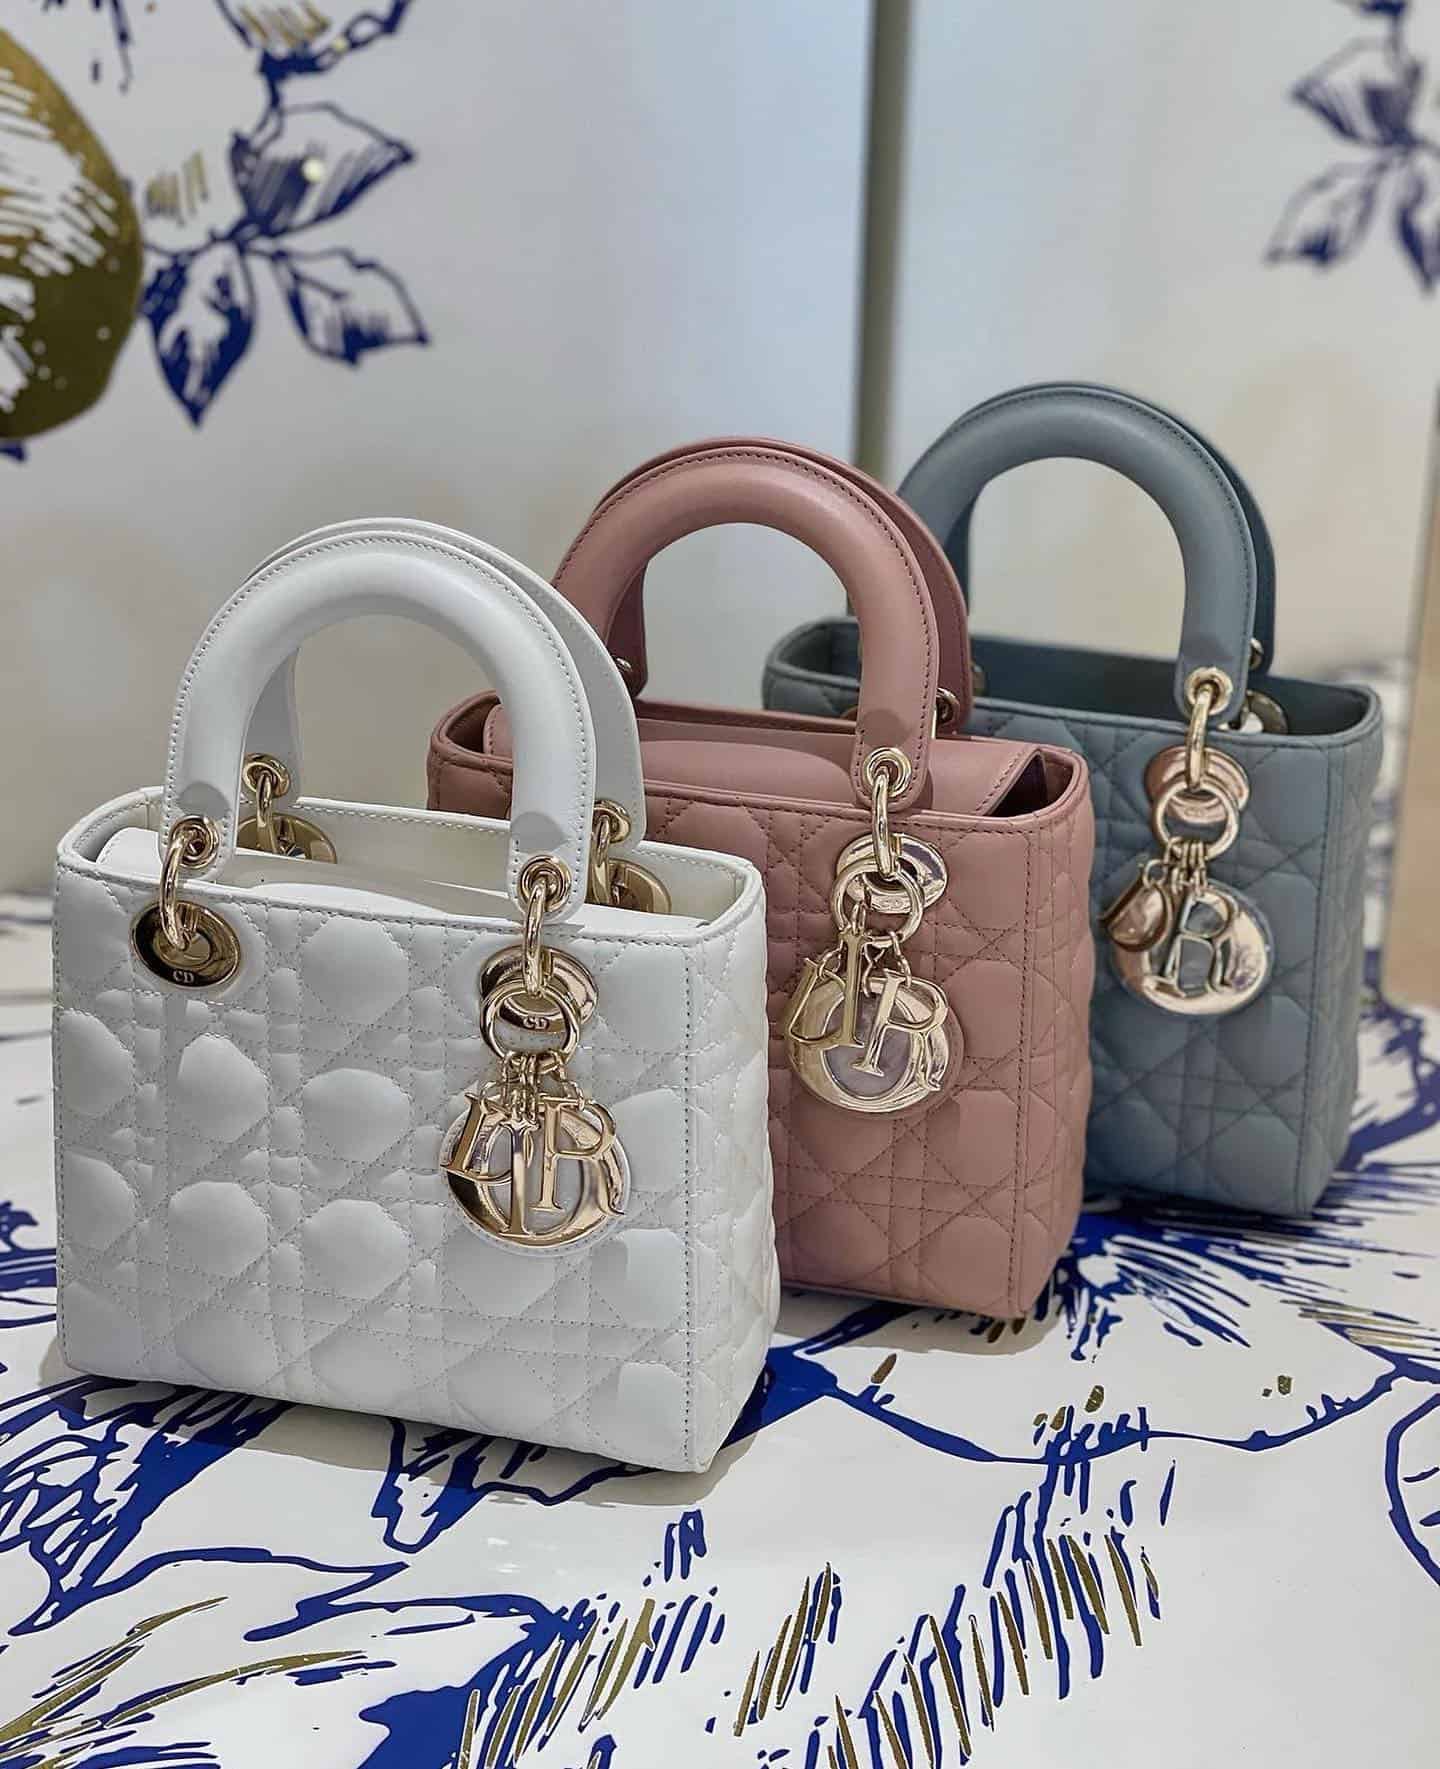 Is the Lady Dior bag timeless